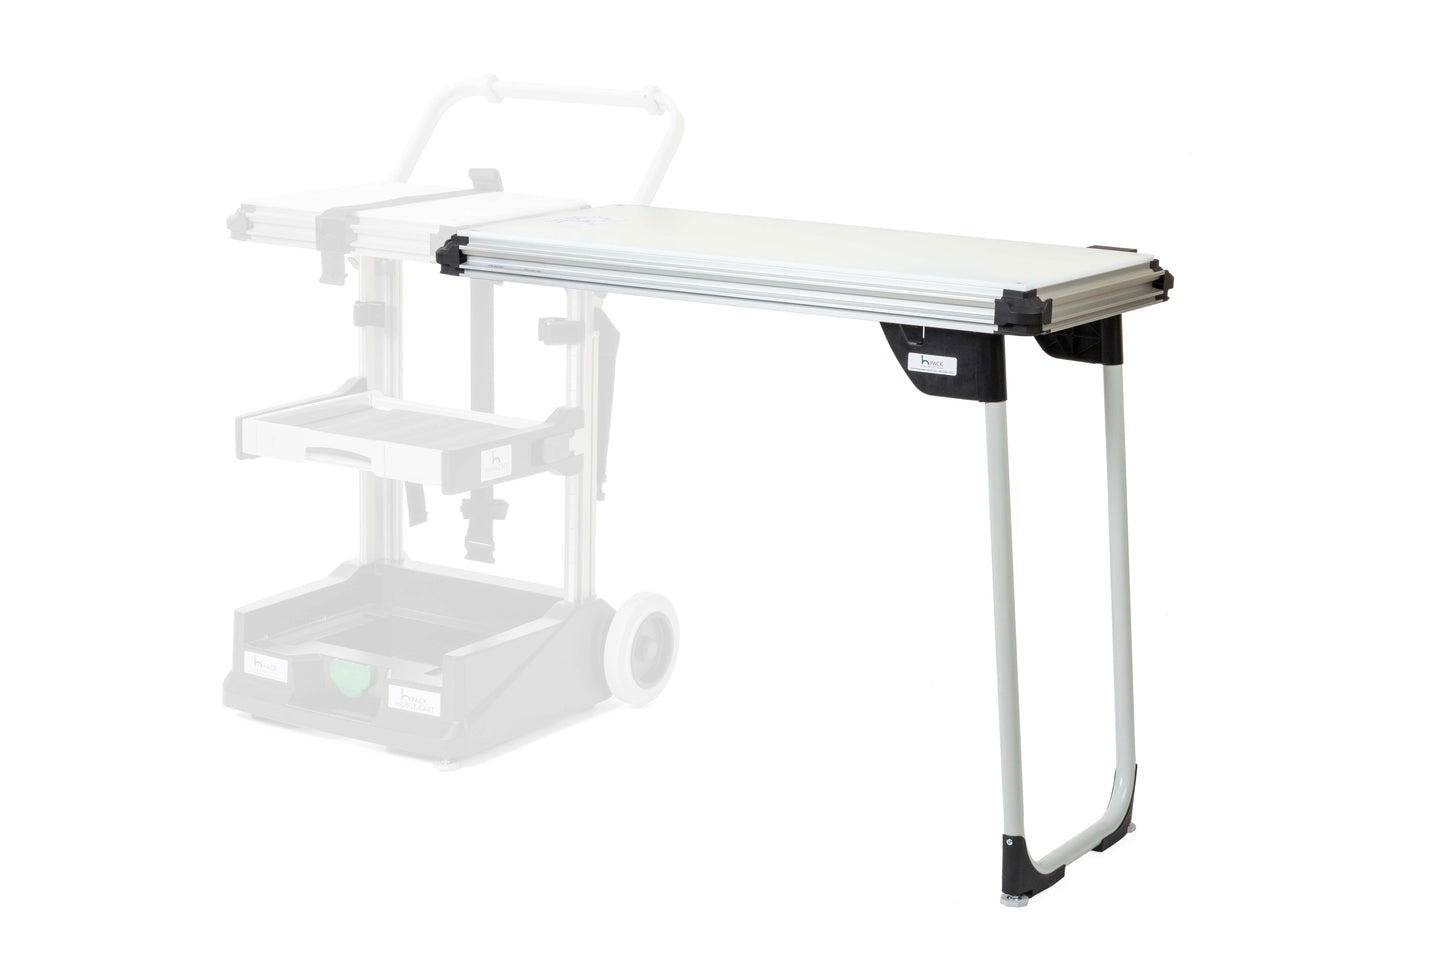 Elevate your laboratory setup with the Mobile Cart & Table, the perfect companion for your hPACK cases. A compact table with an easy fold-out design seamlessly transforms the Cart into a fully functional lab station, providing a versatile workspace wherever needed. This versatile system brings mobility and efficiency to your lab work, allowing you to conduct experiments, tests, and analyses wherever nee